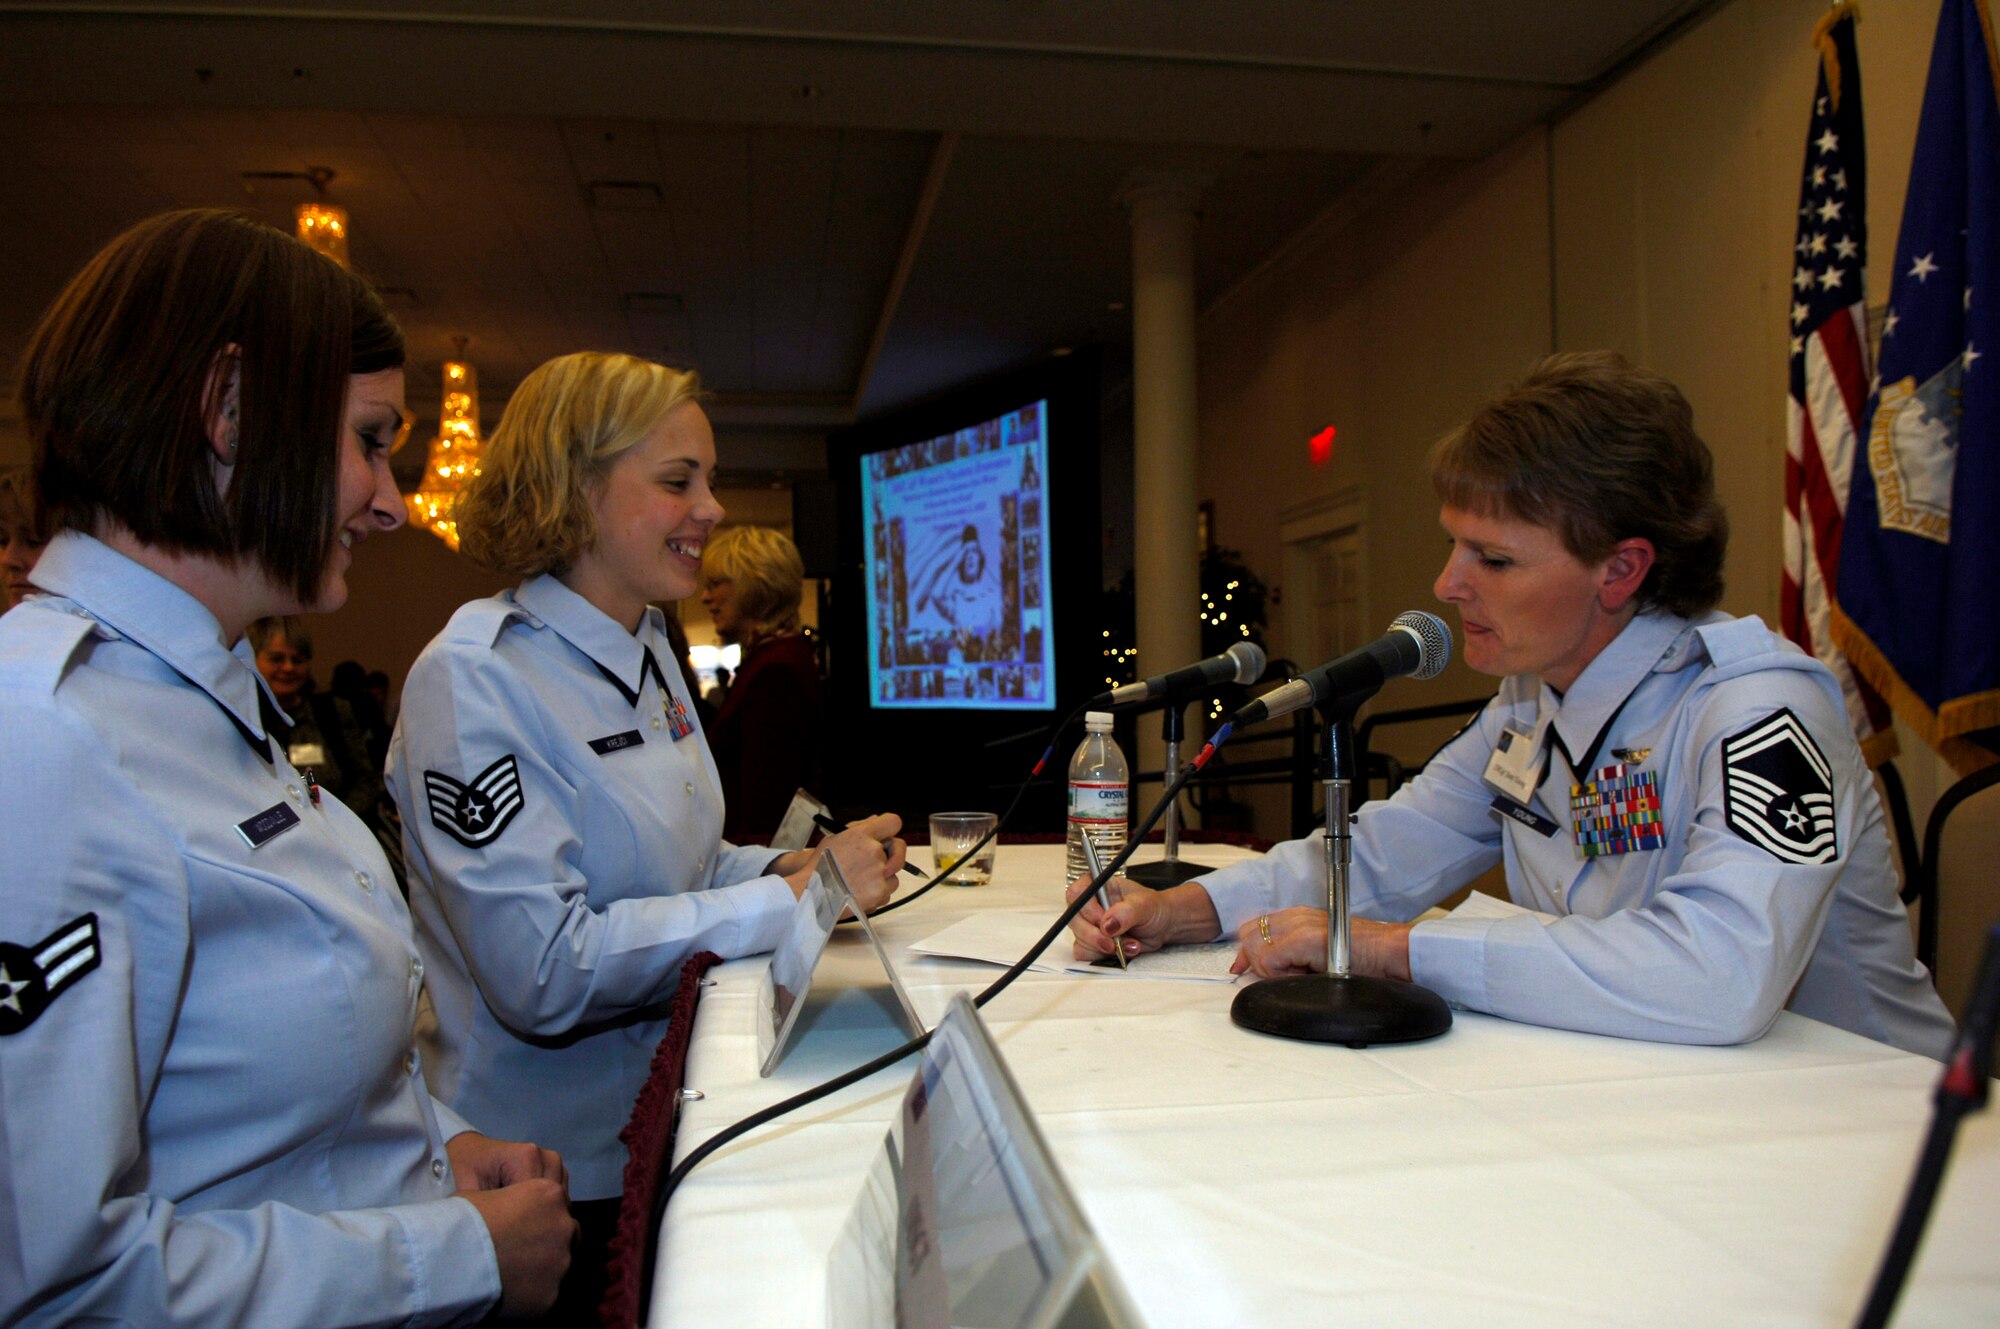 Senior Master Sgt. Joan Young, 1st Combat Camera Squadron, Charleston Air Force Base, S.C.,  gives her autograph to Staff Sgt. Lisa Krejci, 9th Comptroller Squadron, Beale AFB, Calif., at the 2007 Air Force Heritage to Horizon Women's Training Symposium in Springfield, Va., Oct. 31. (U.S. Air Force photo/Staff Sgt. Suzanne M. Day)